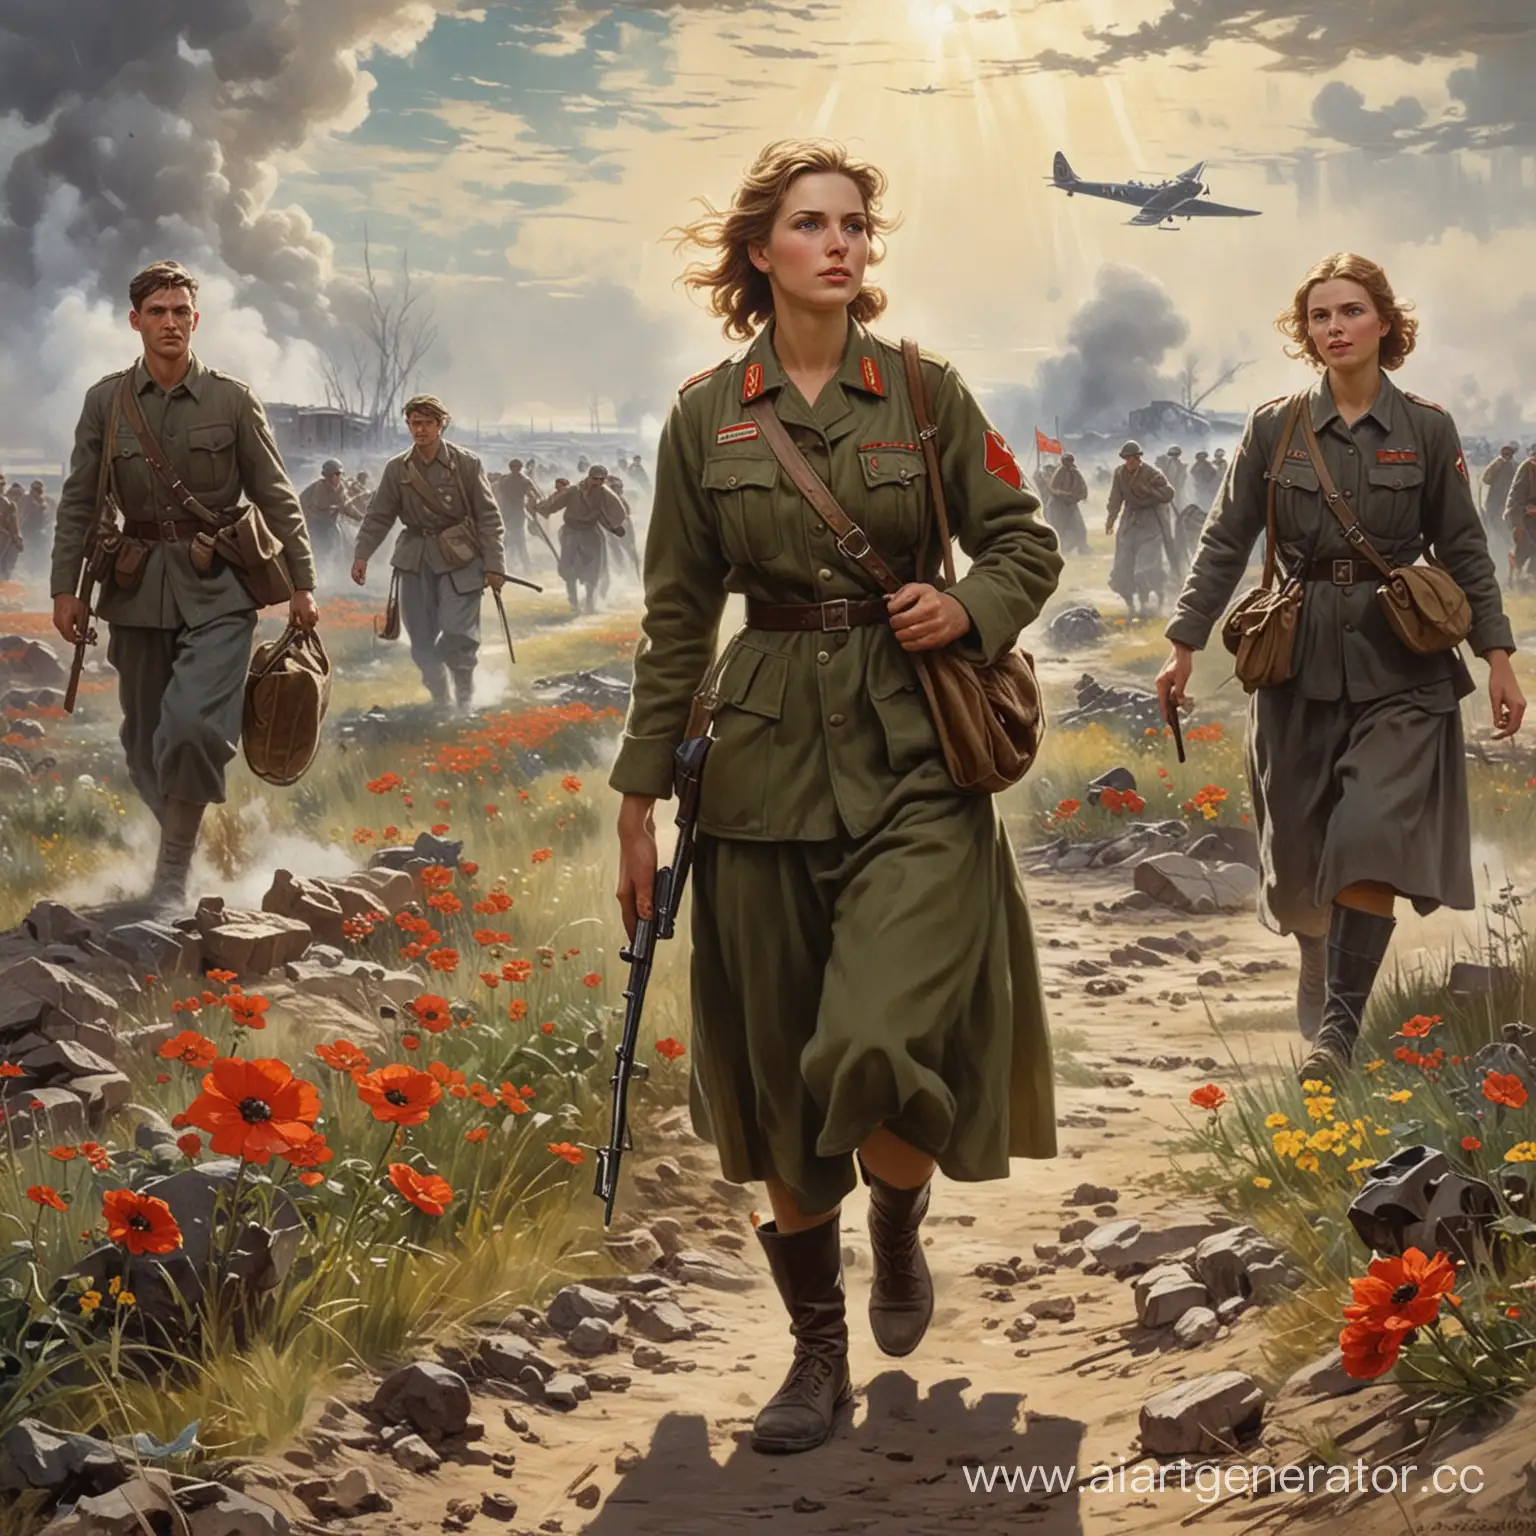 Nurse-Rescuing-Wounded-Soldiers-in-World-War-II